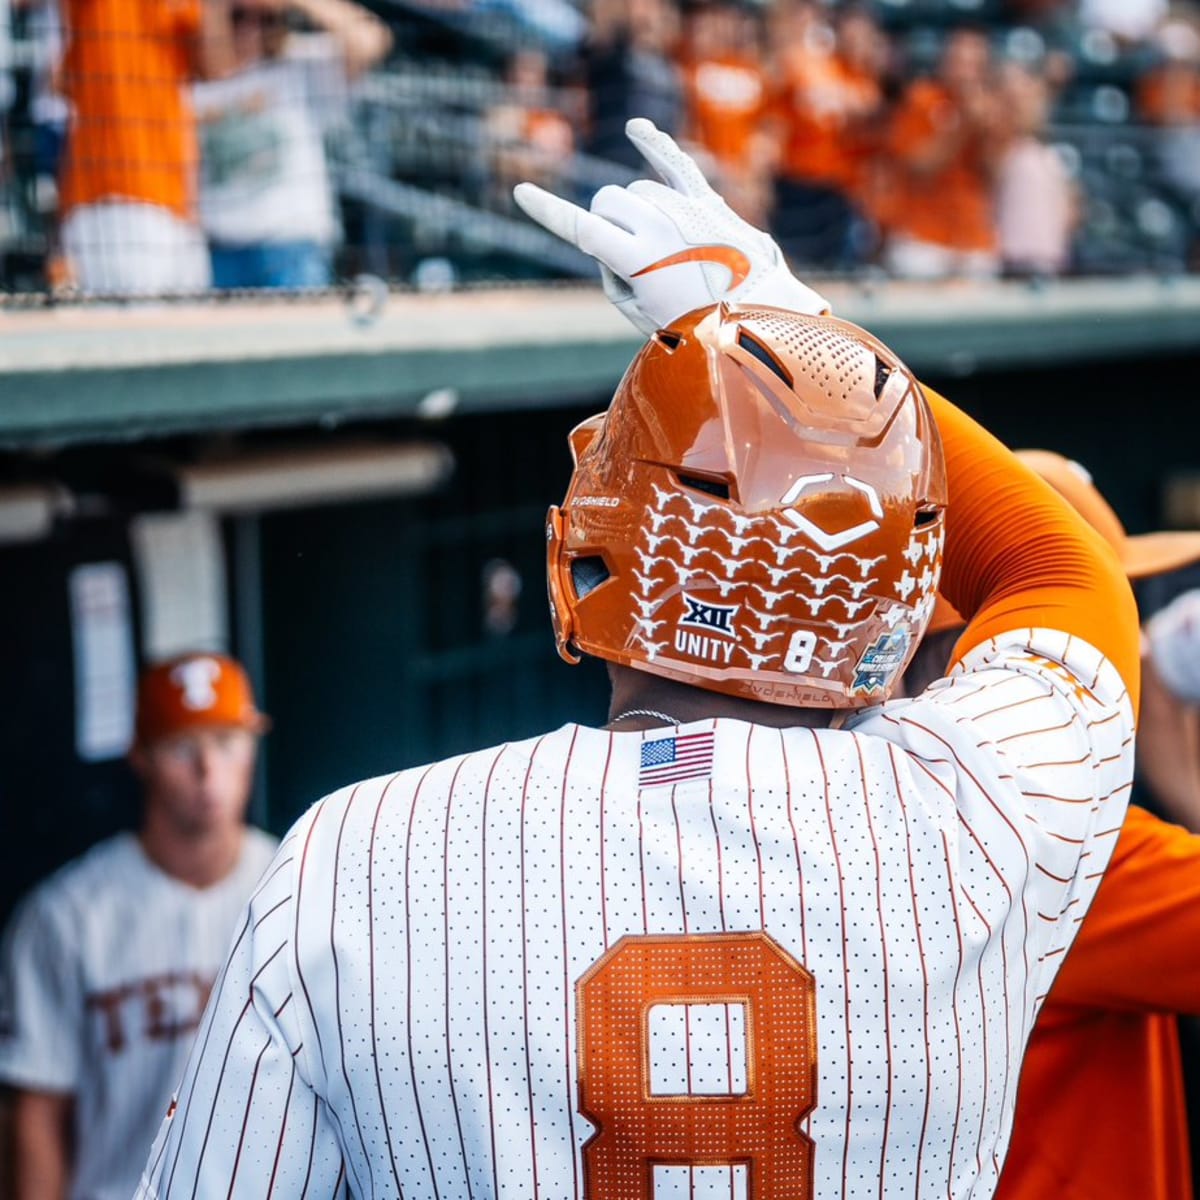 Texas Longhorns baseball is near unanimous pick for country's No. 1 team